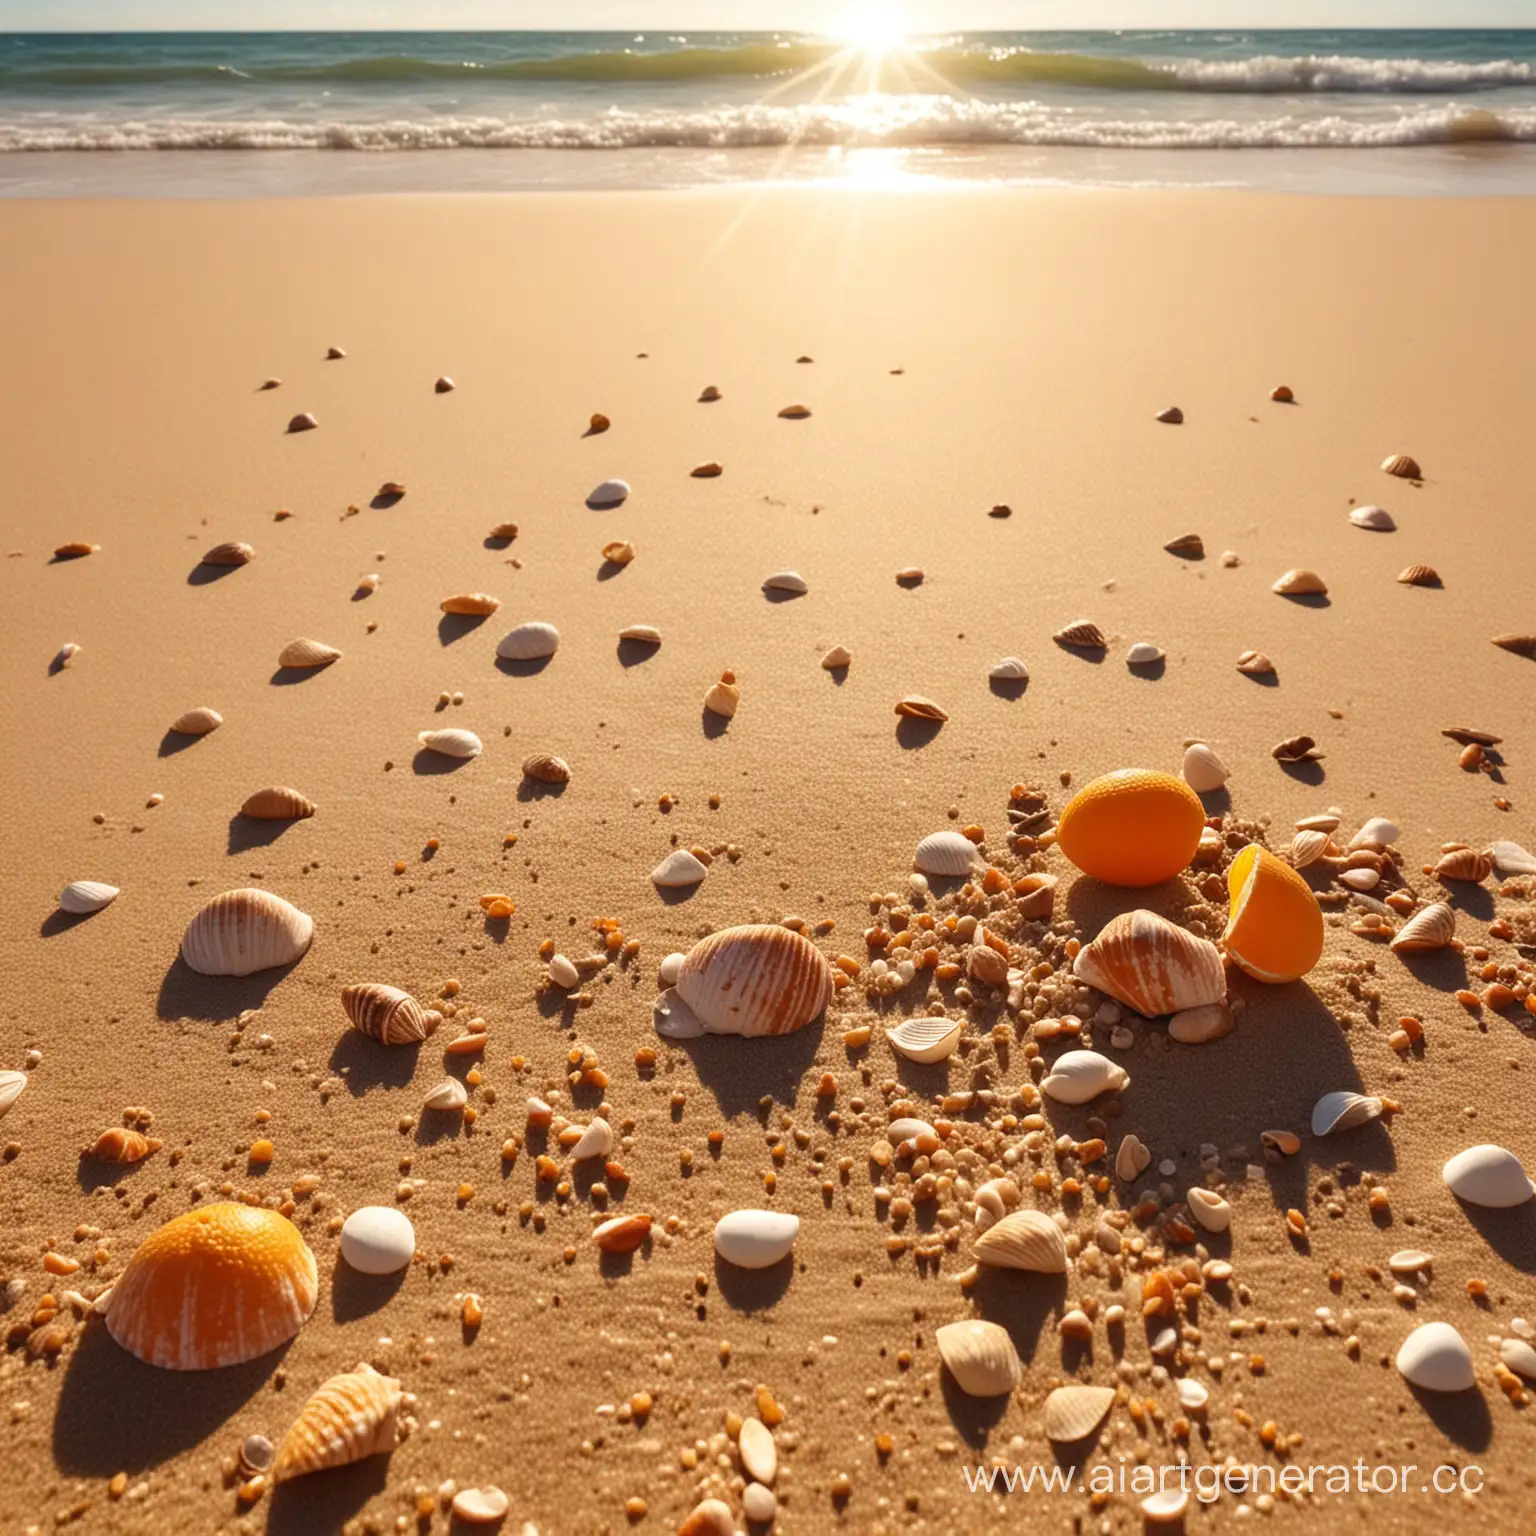 Vibrant-Beach-Scene-with-Oranges-and-Shells-under-Bright-Sunlight